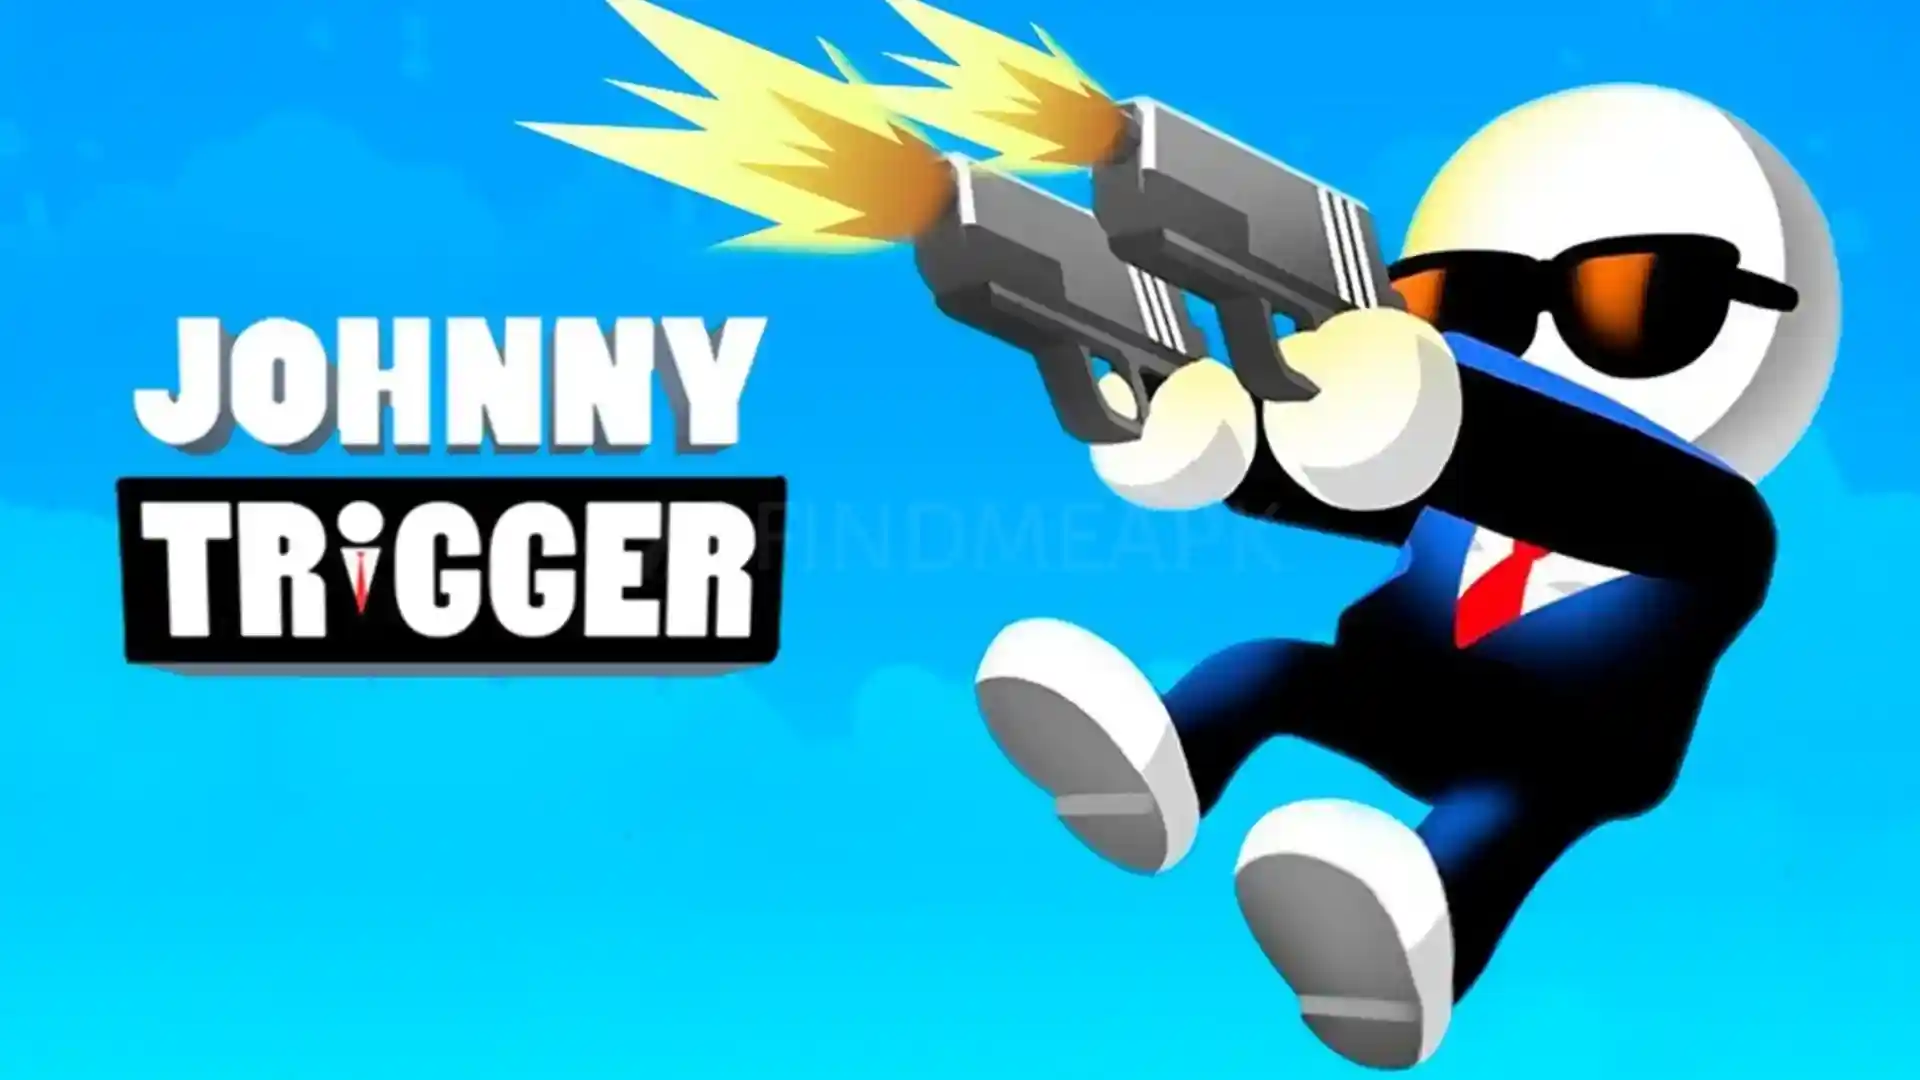 johnny trigger feature image